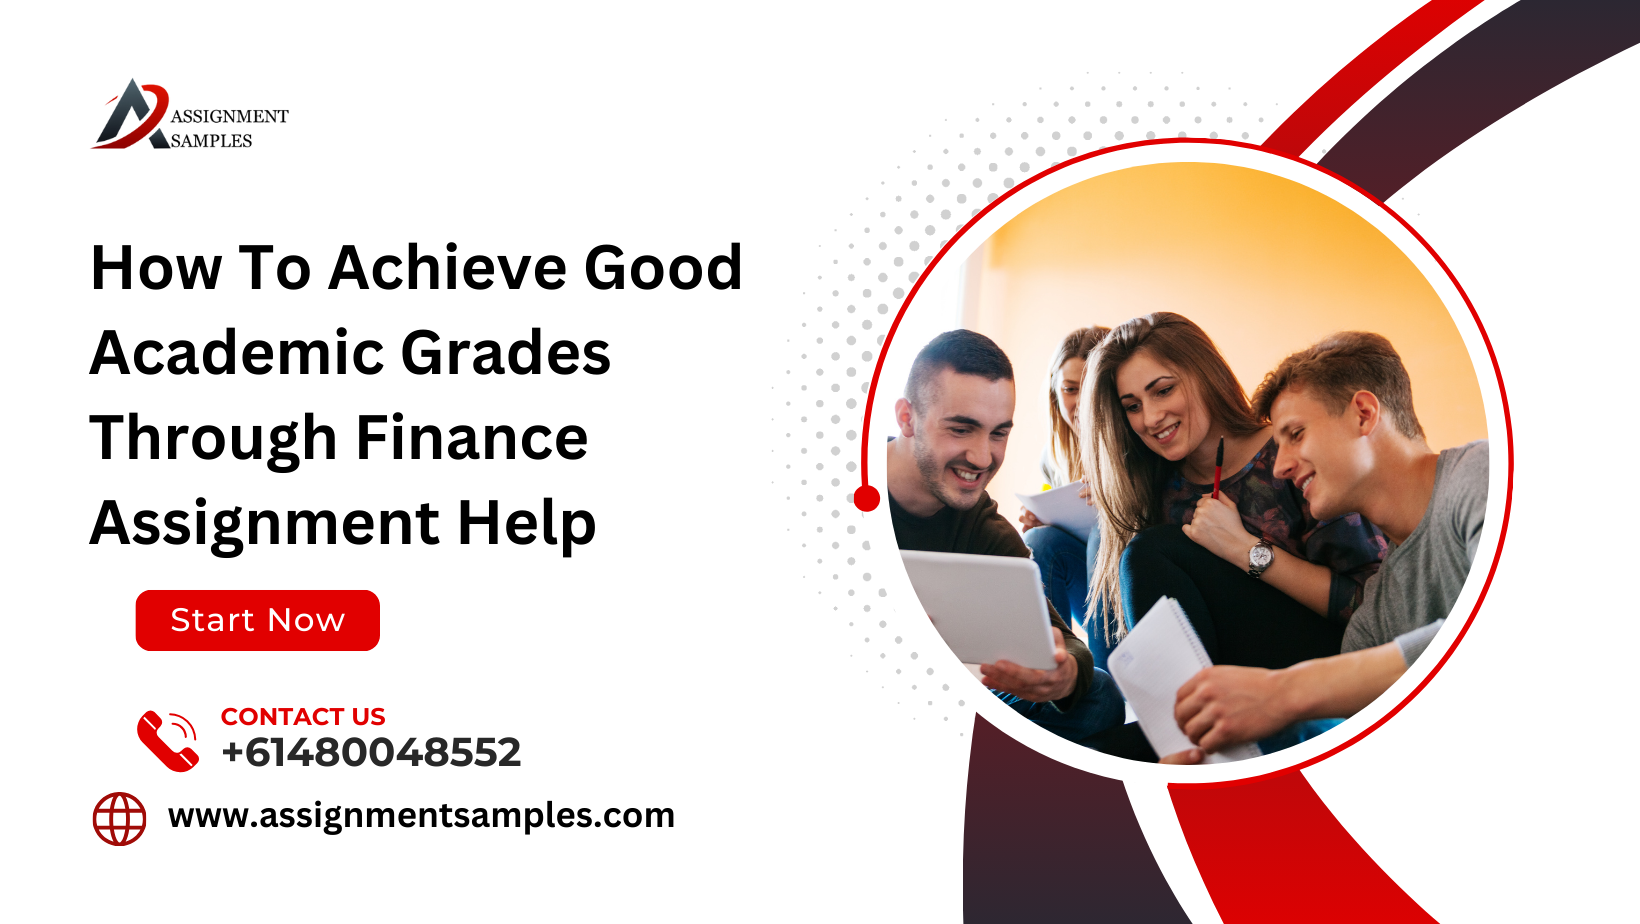 How To Achieve Good Academic Grades Through Finance Assignment Help